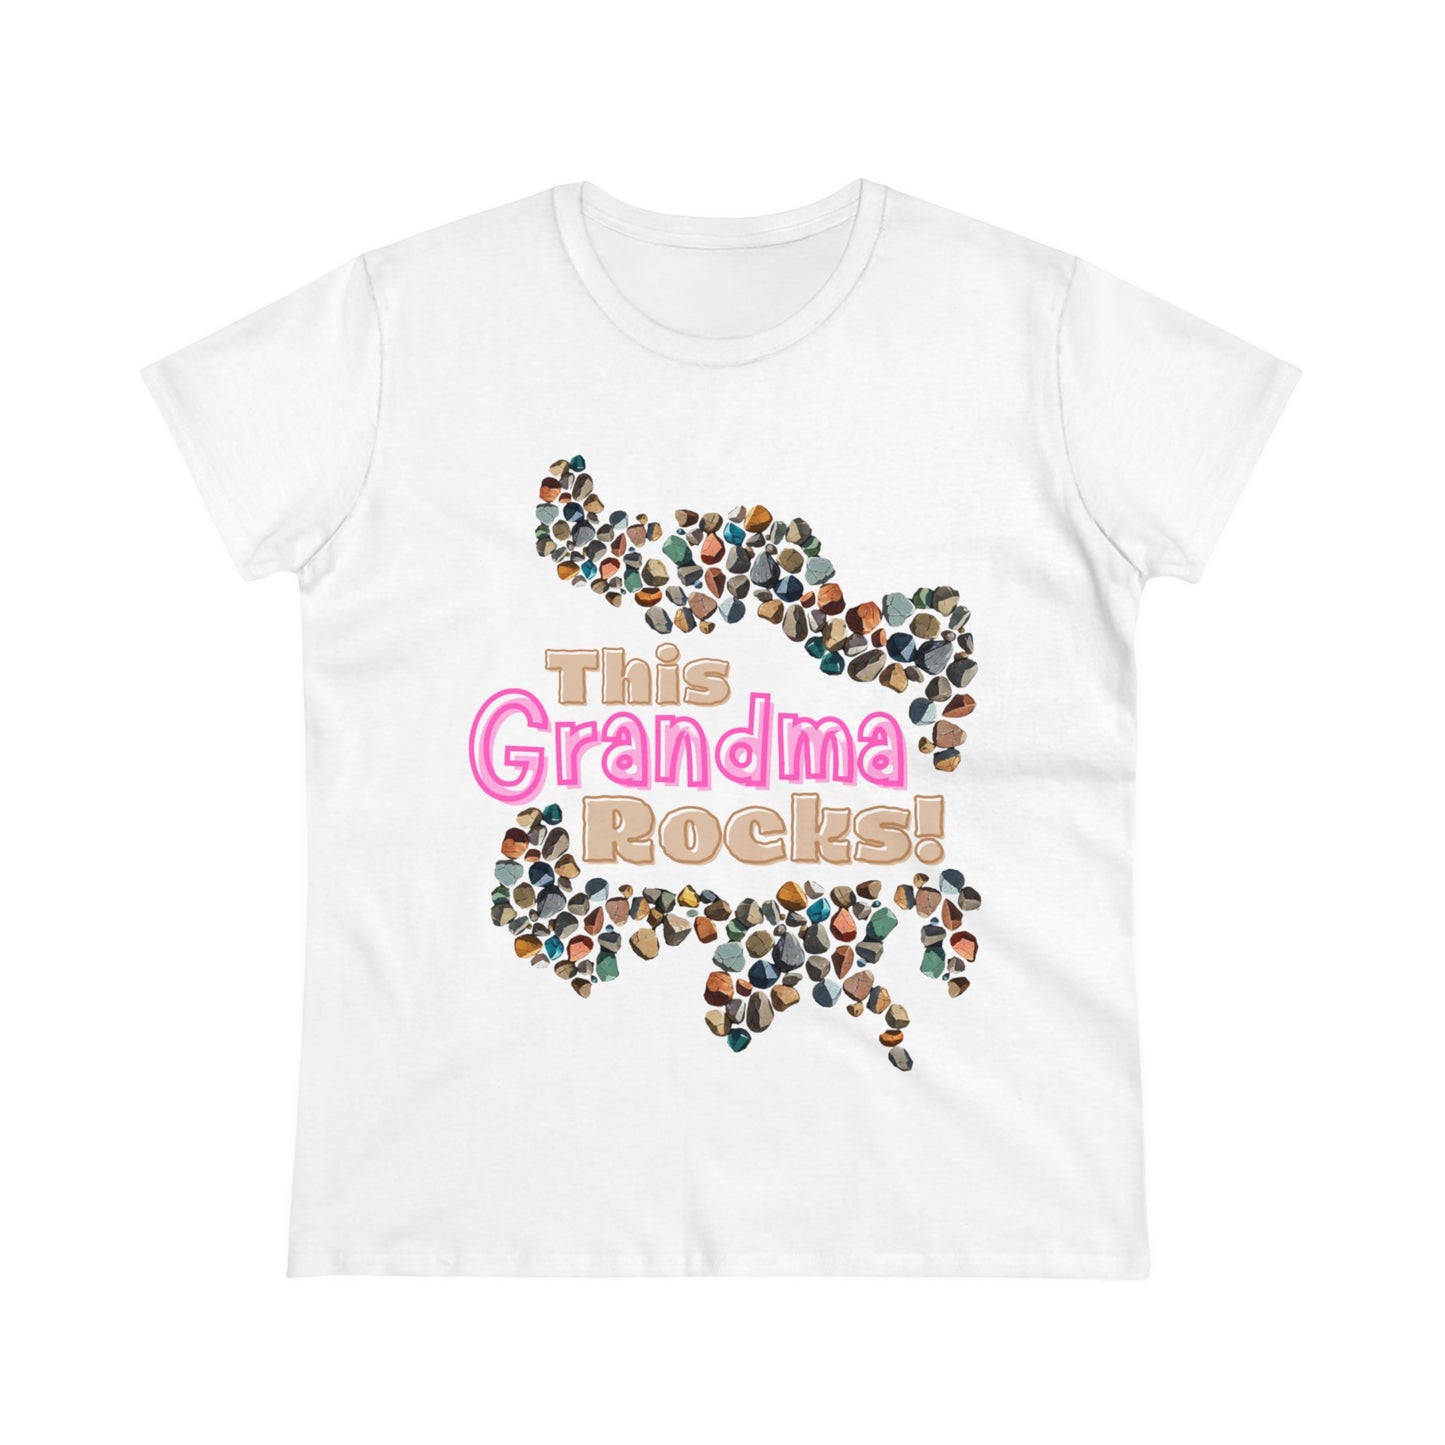 Mother’s Day: This grandma rocks - Women's Midweight Cotton Tee